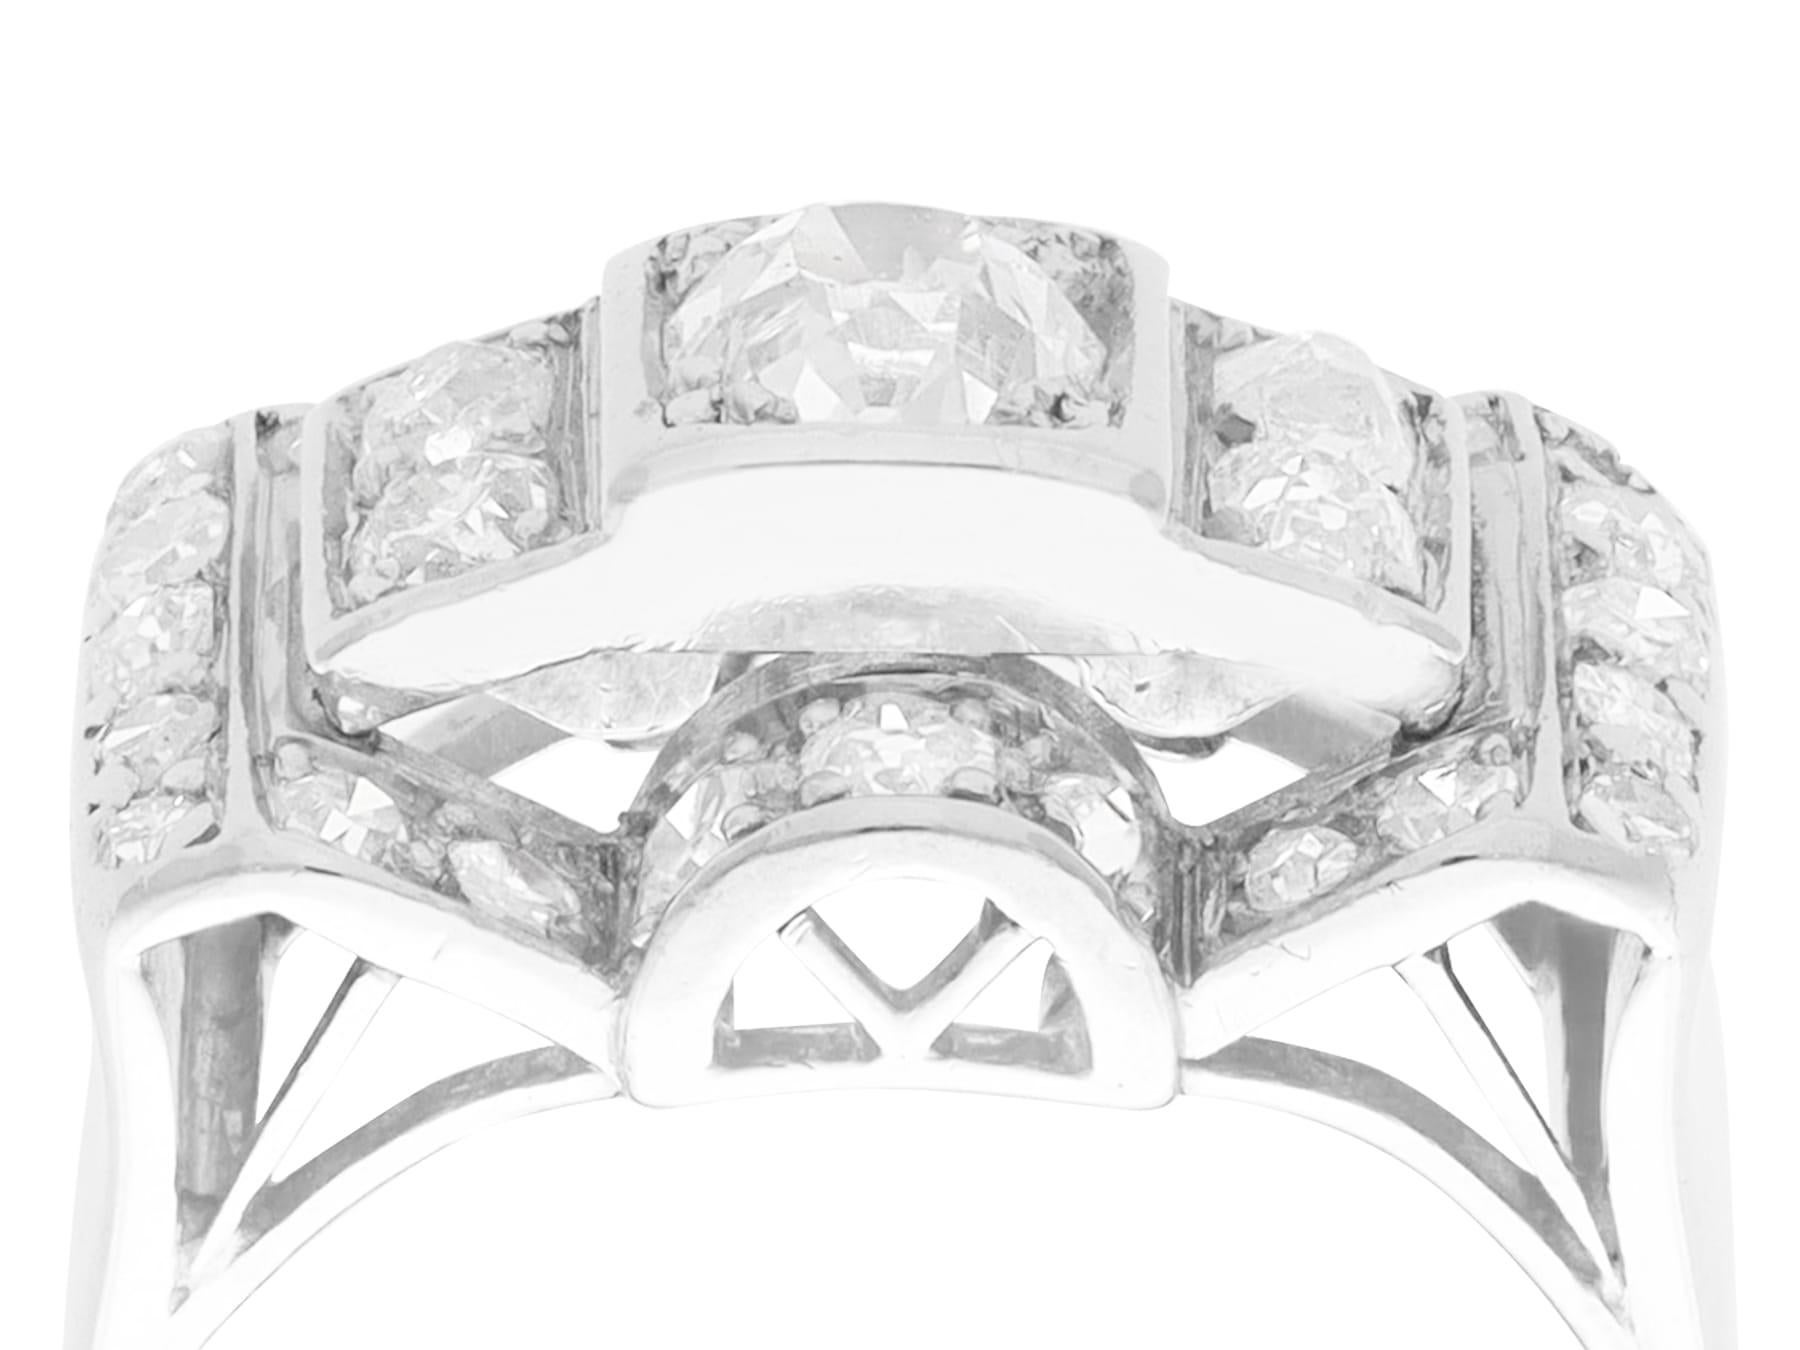 A fine and impressive 1.45 carat diamond, 18 karat white gold and platinum set Art Deco cocktail ring; part of our diverse diamond jewelry and estate jewelry collections.

This fine and impressive 1930s diamond ring has been crafted in 18k white